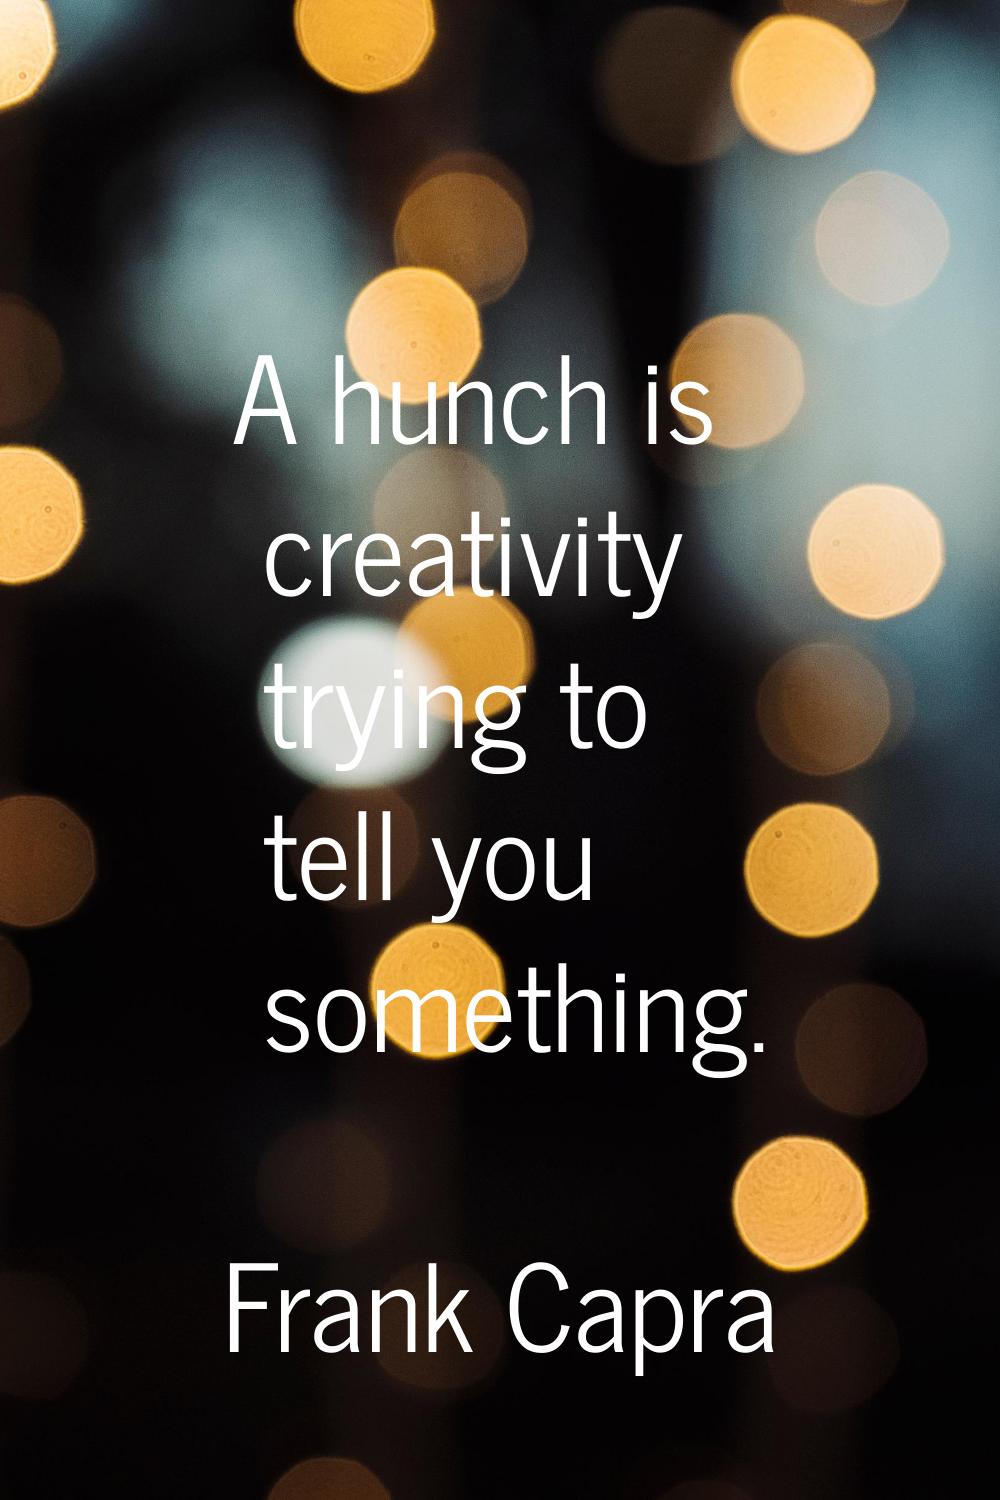 A hunch is creativity trying to tell you something.